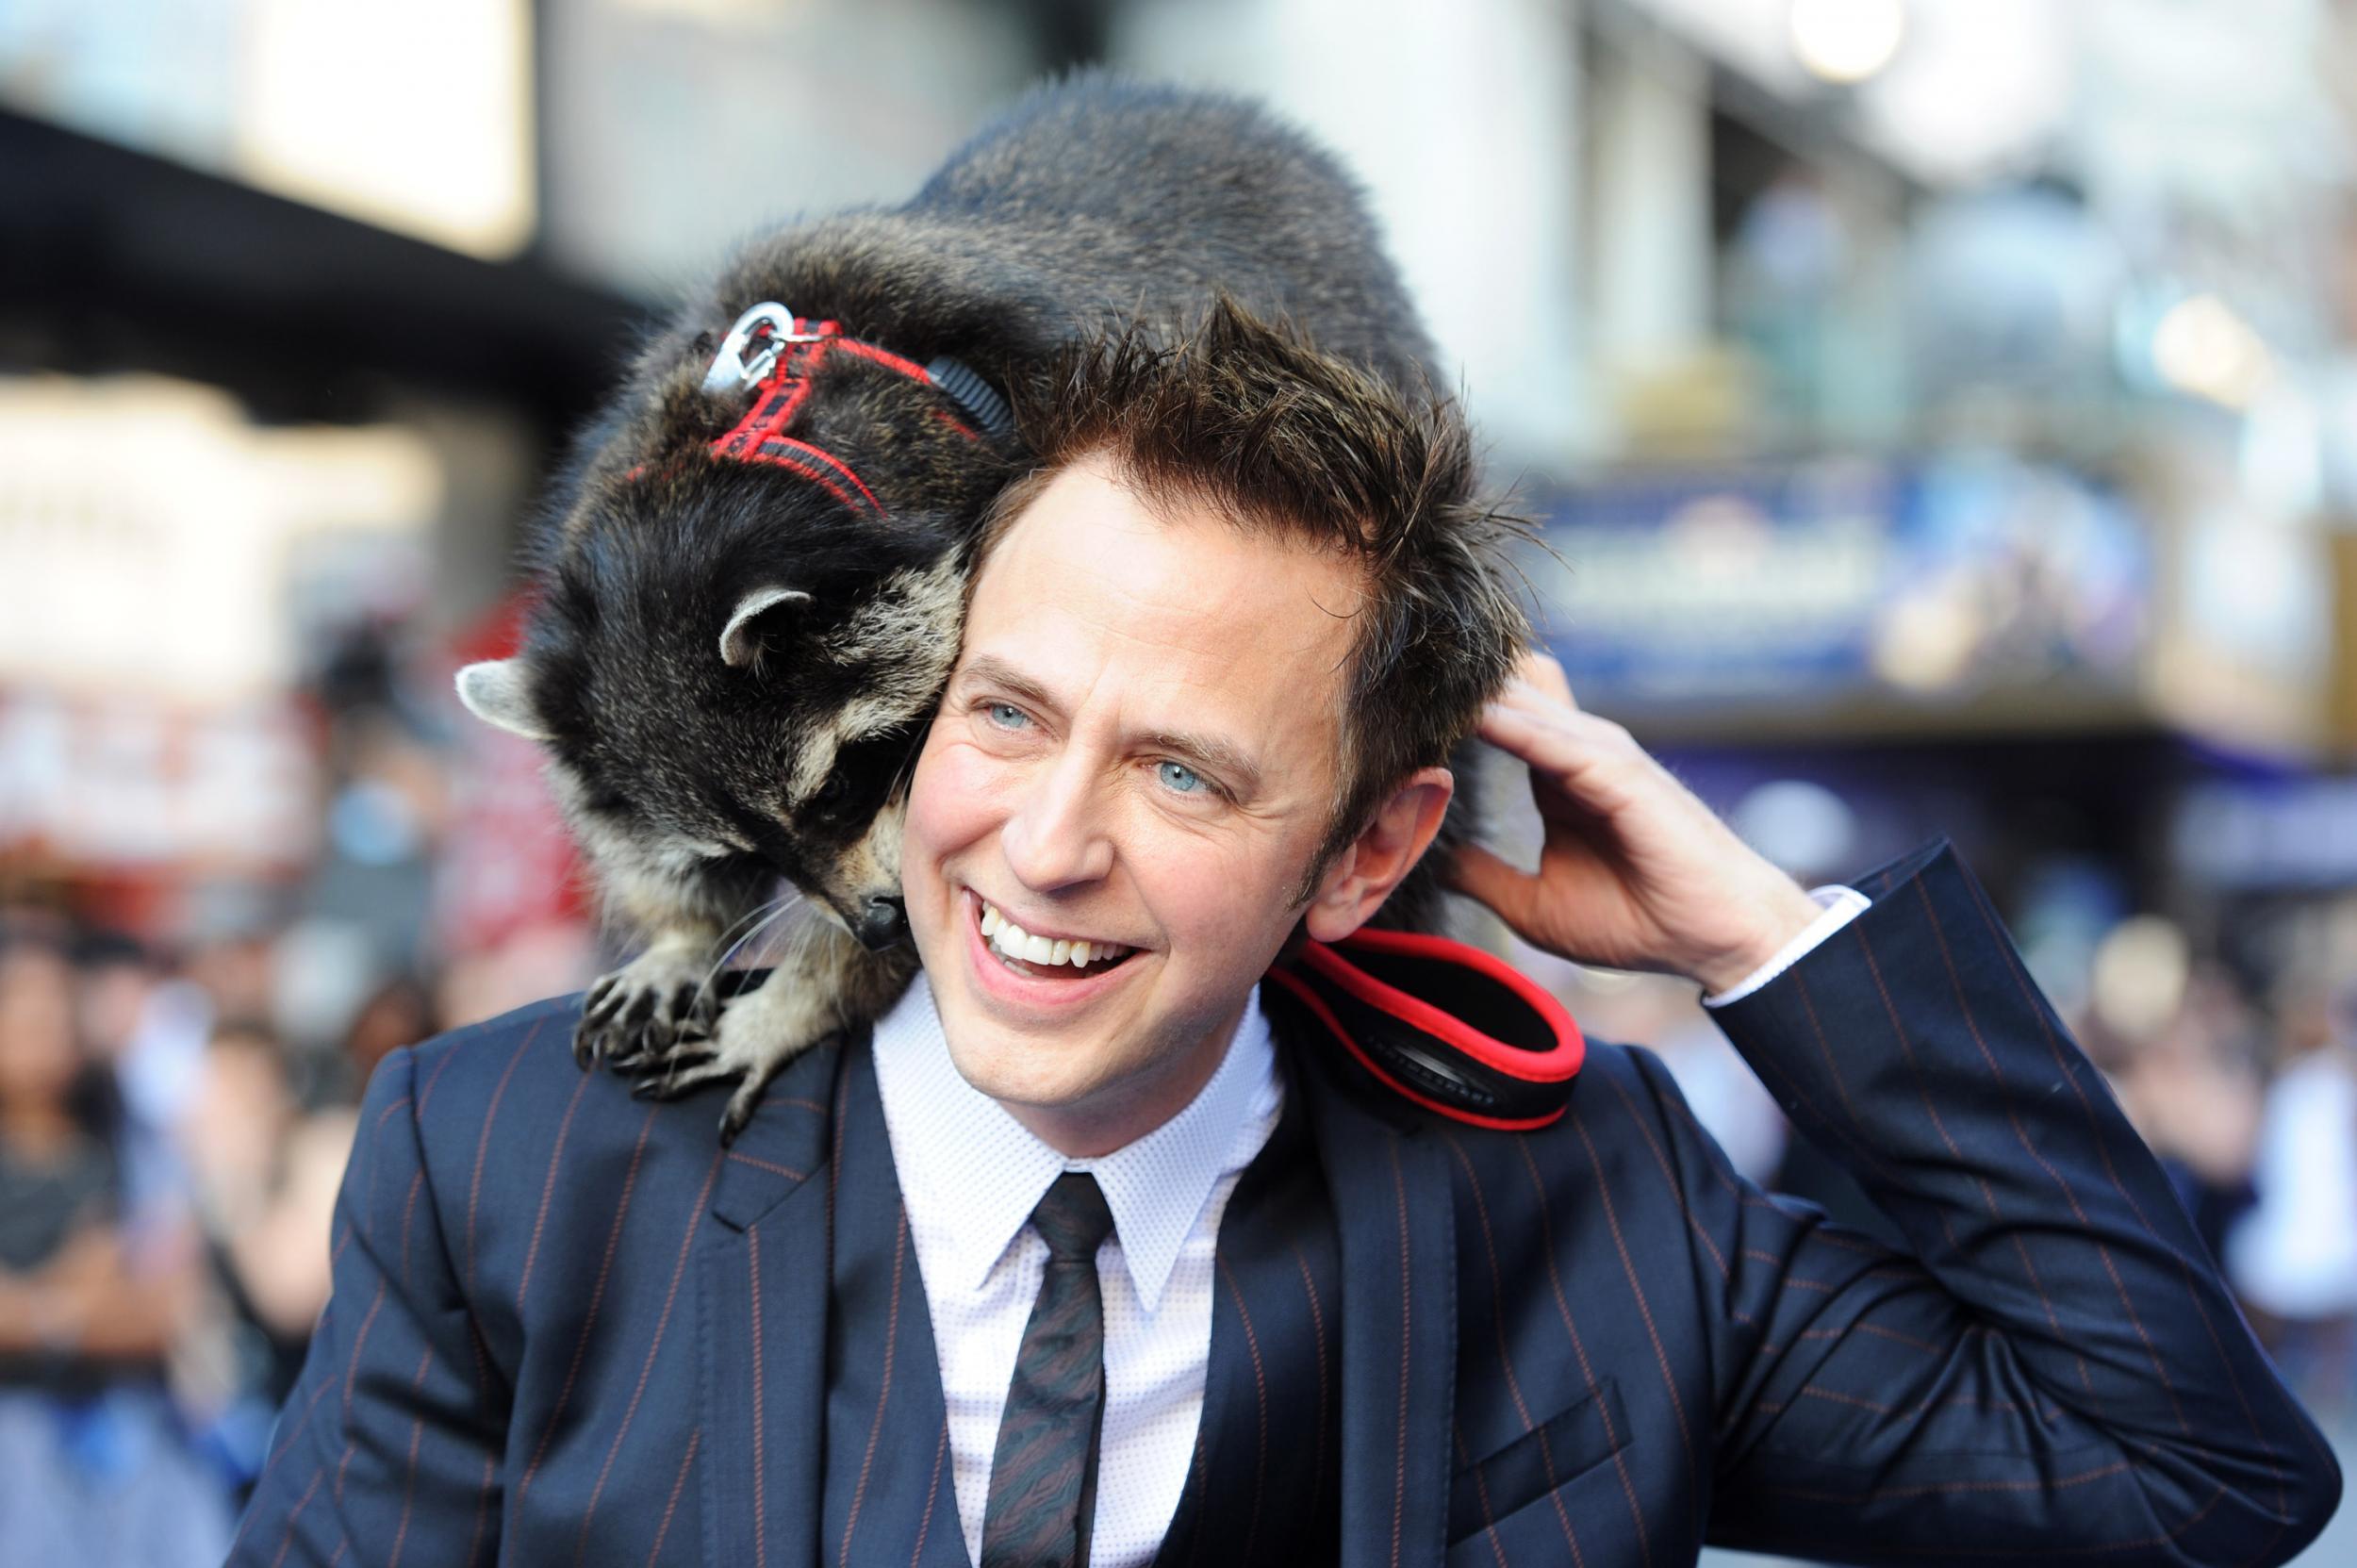 James Gunn at the Guardians of the Galaxy premiere